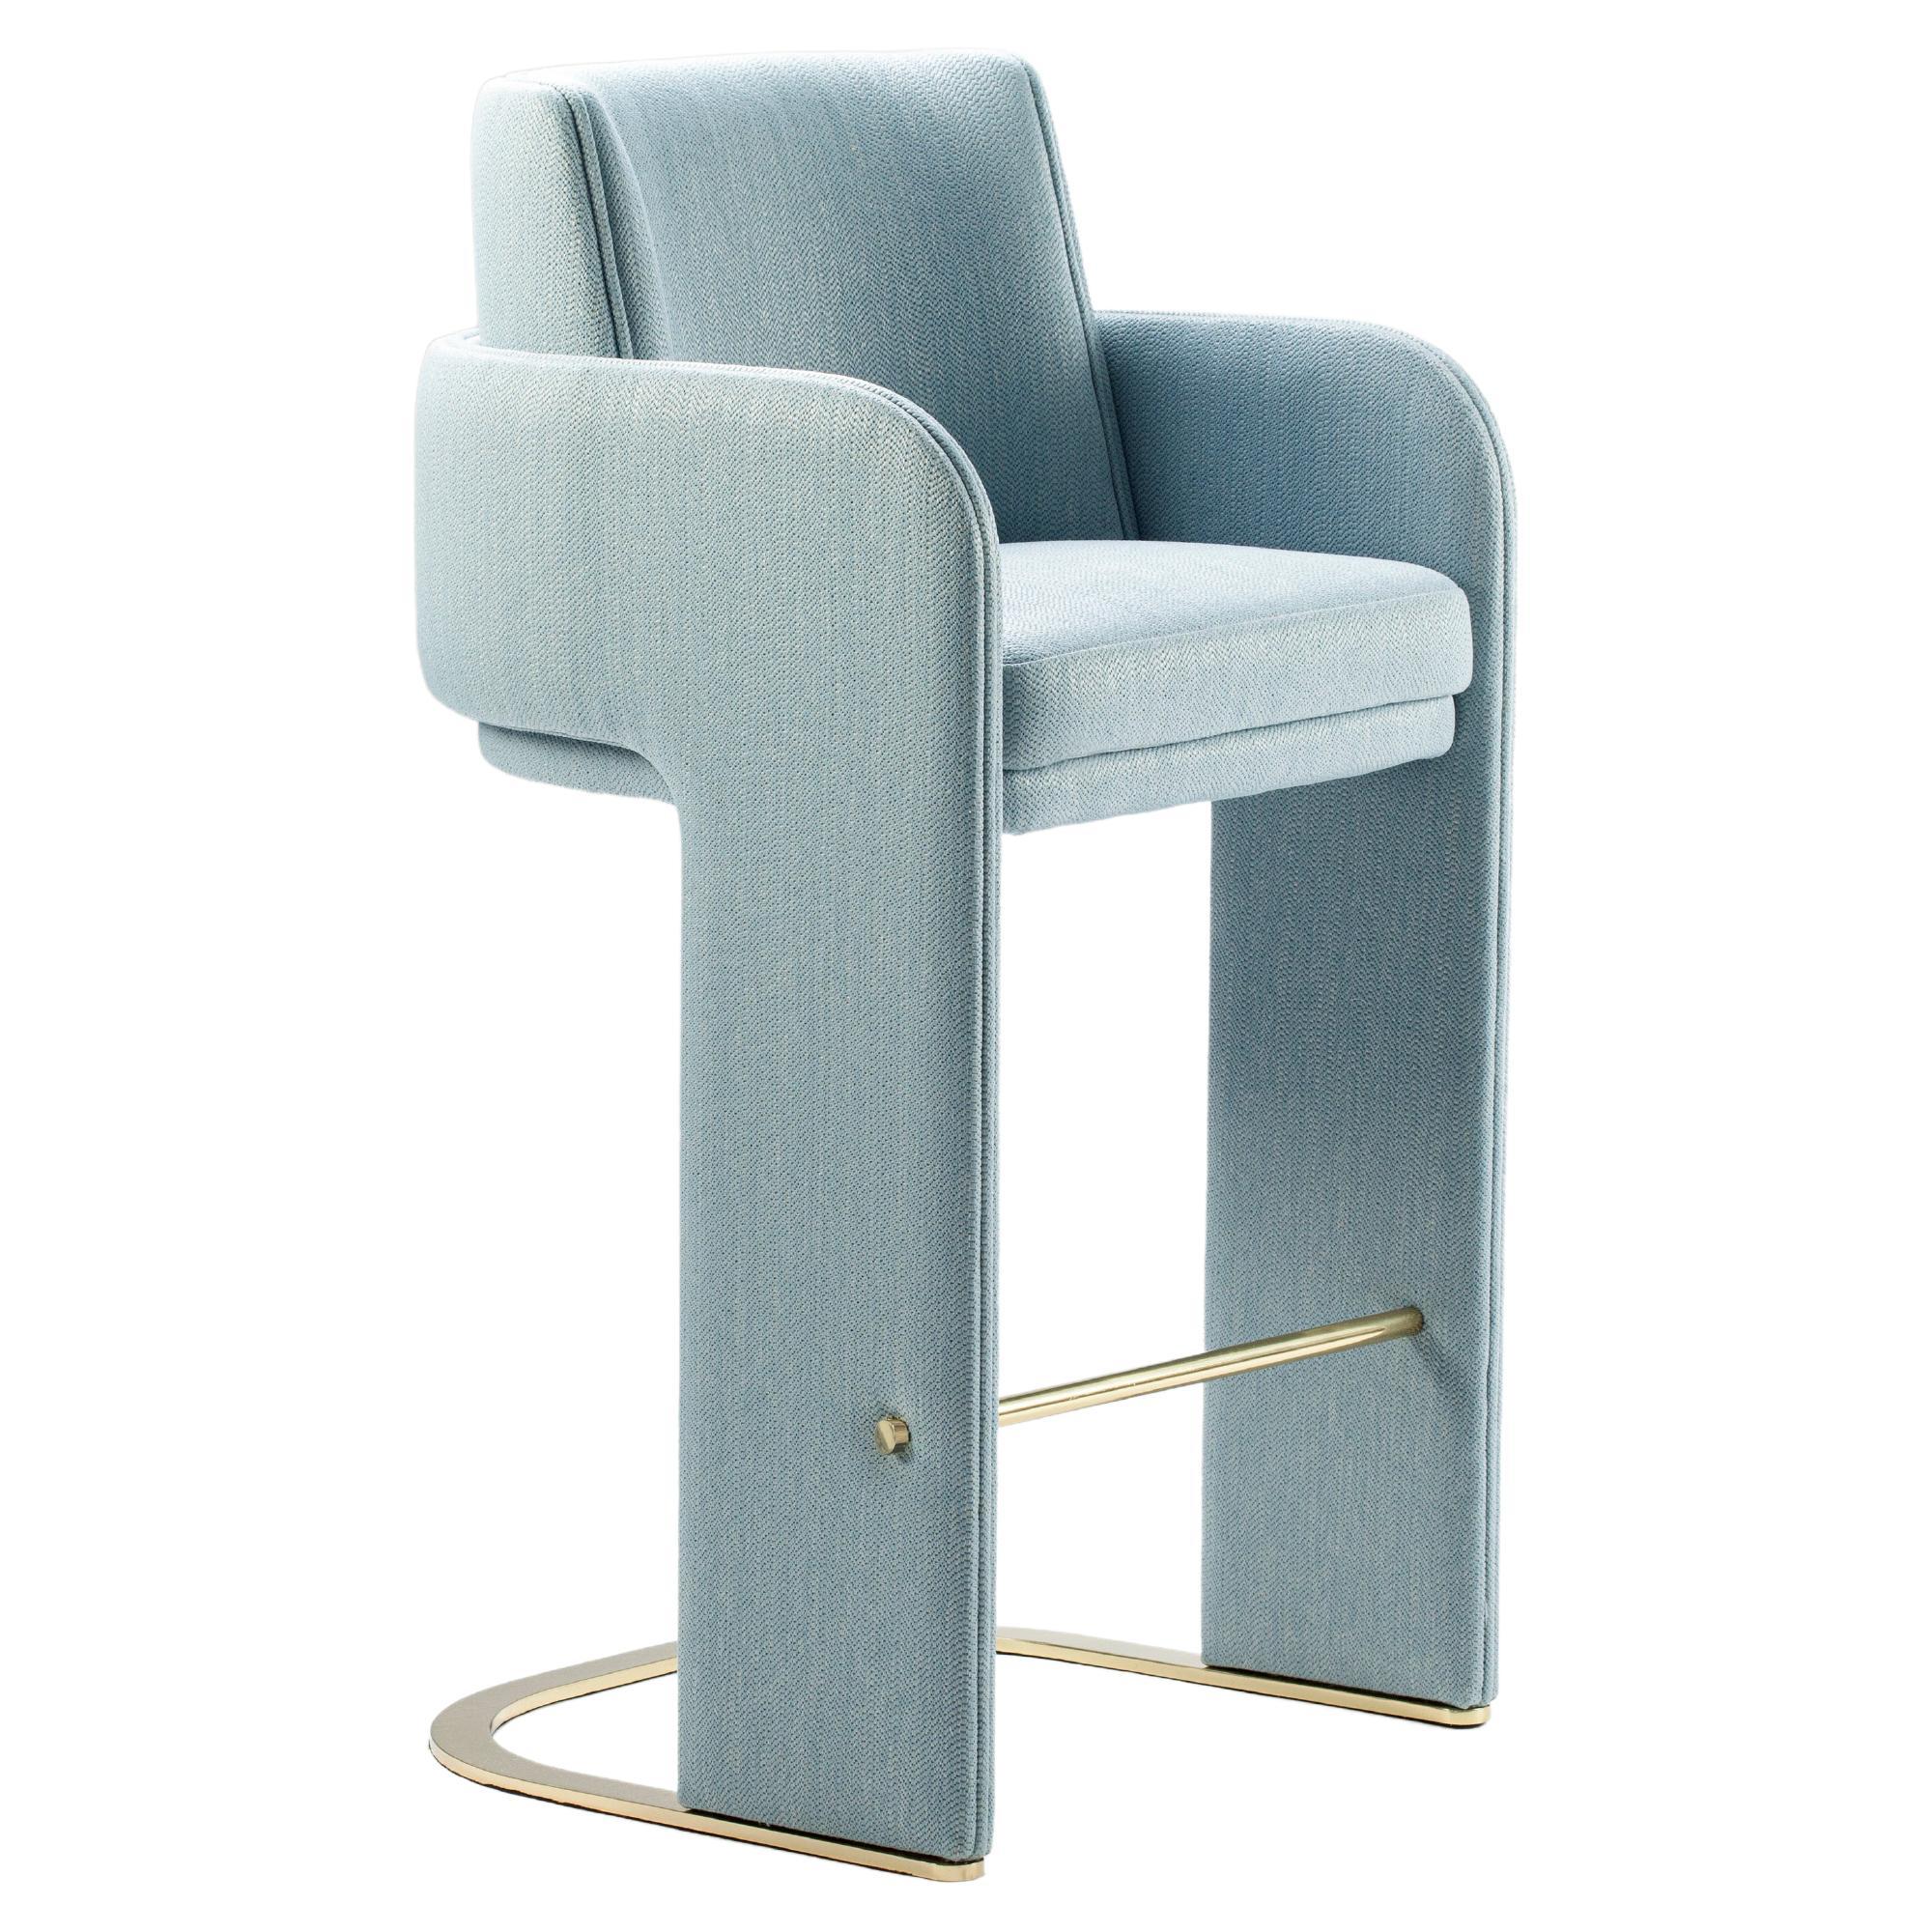 DOOQ Bar Chair with Soft Light Blue Fabric and Brass Footrest Odisseia